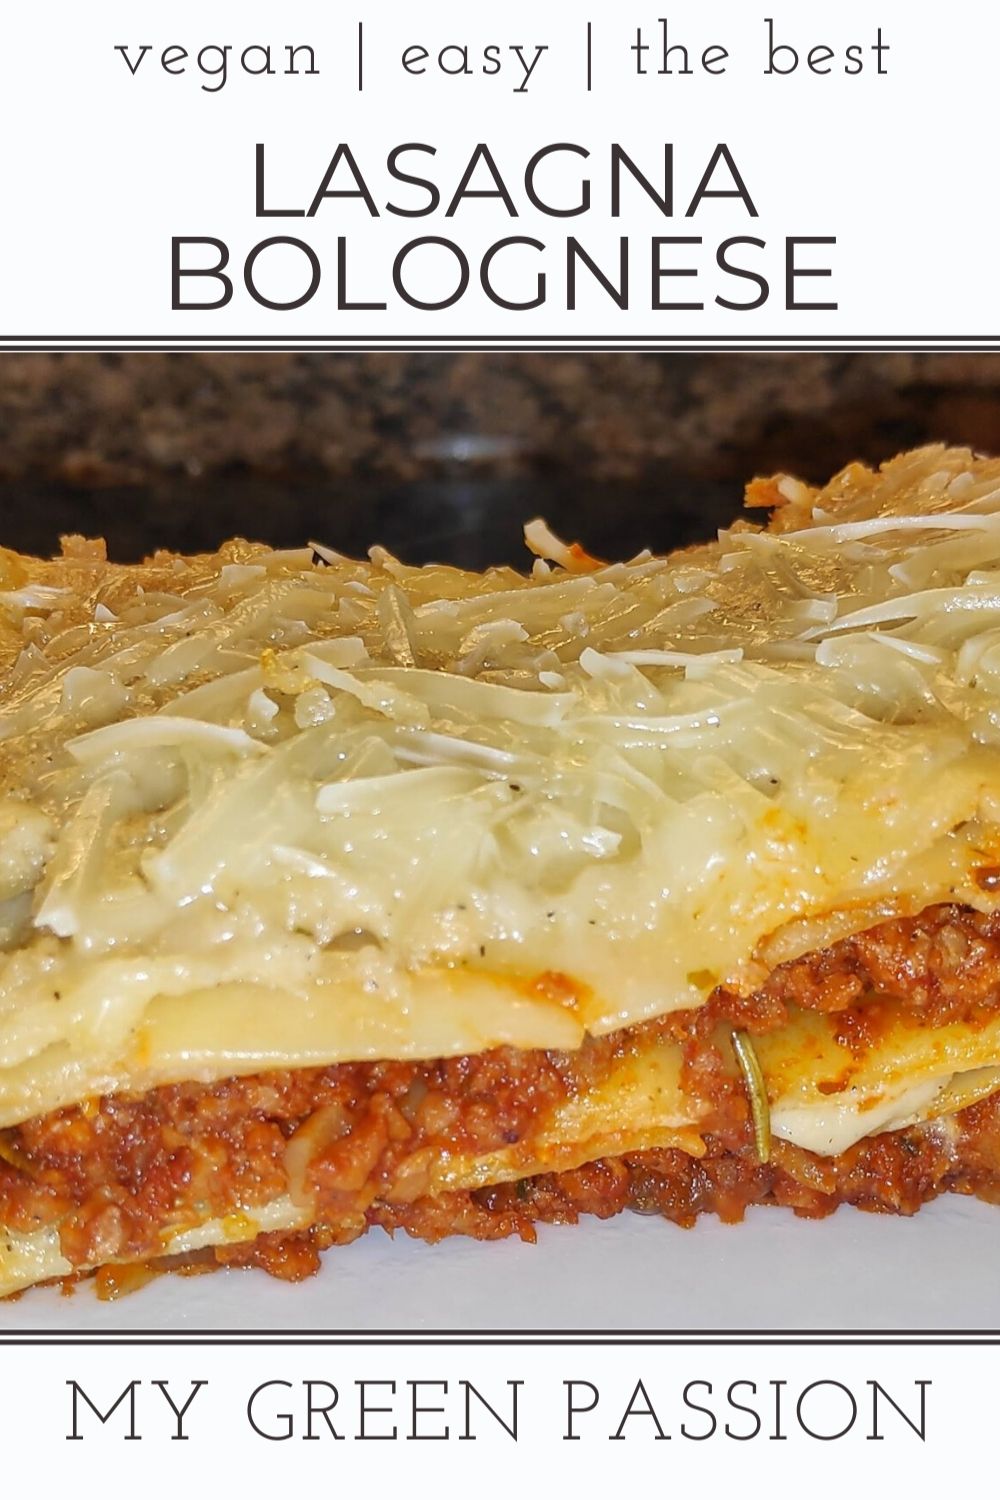 the best vegan lasagna bolognese plant-based easy delicious